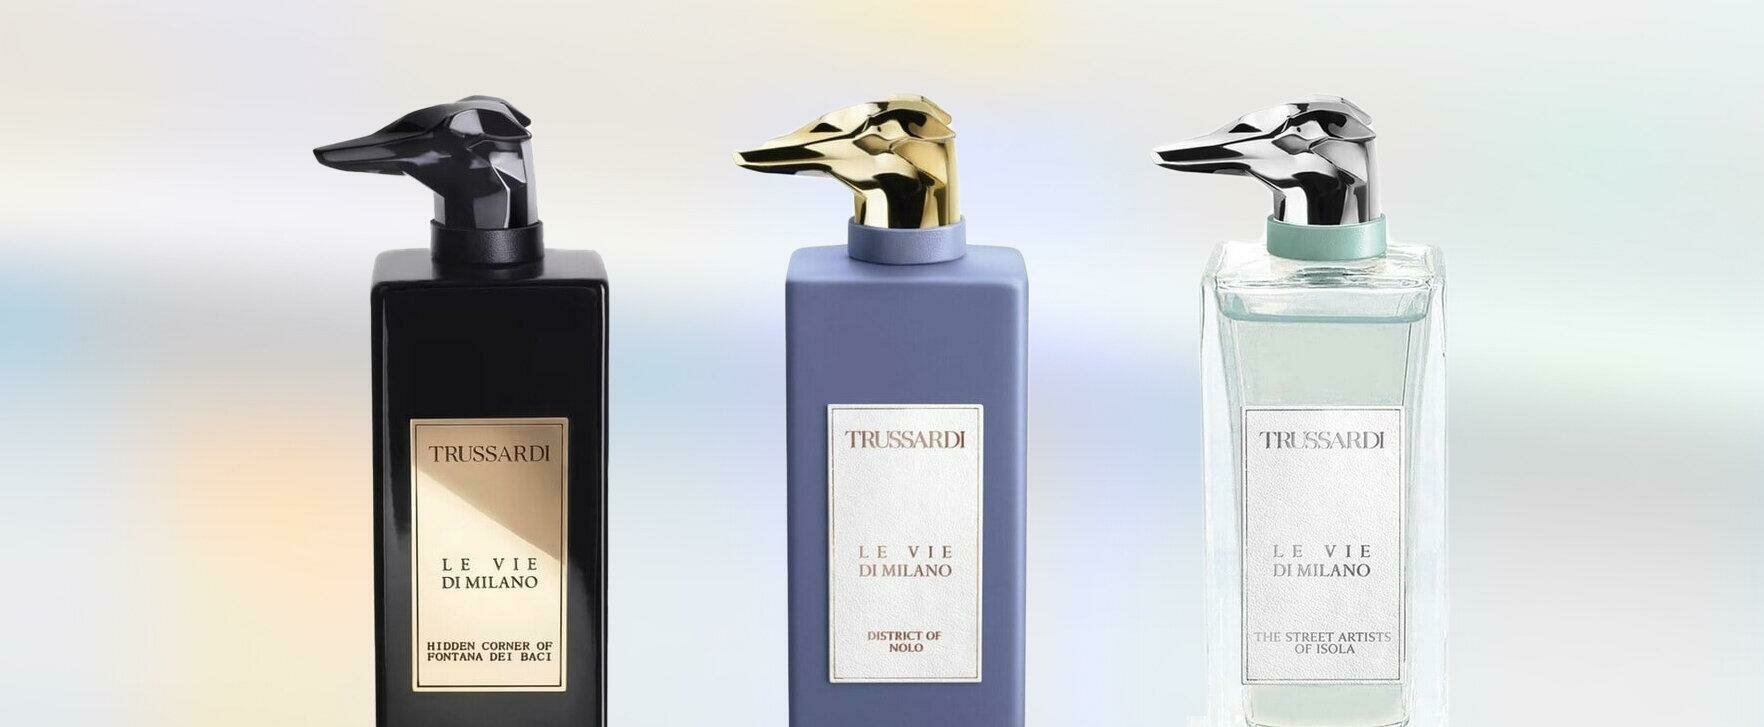 Three New Fragrance Creations From Trussardi: An Olfactory Journey Through Milan